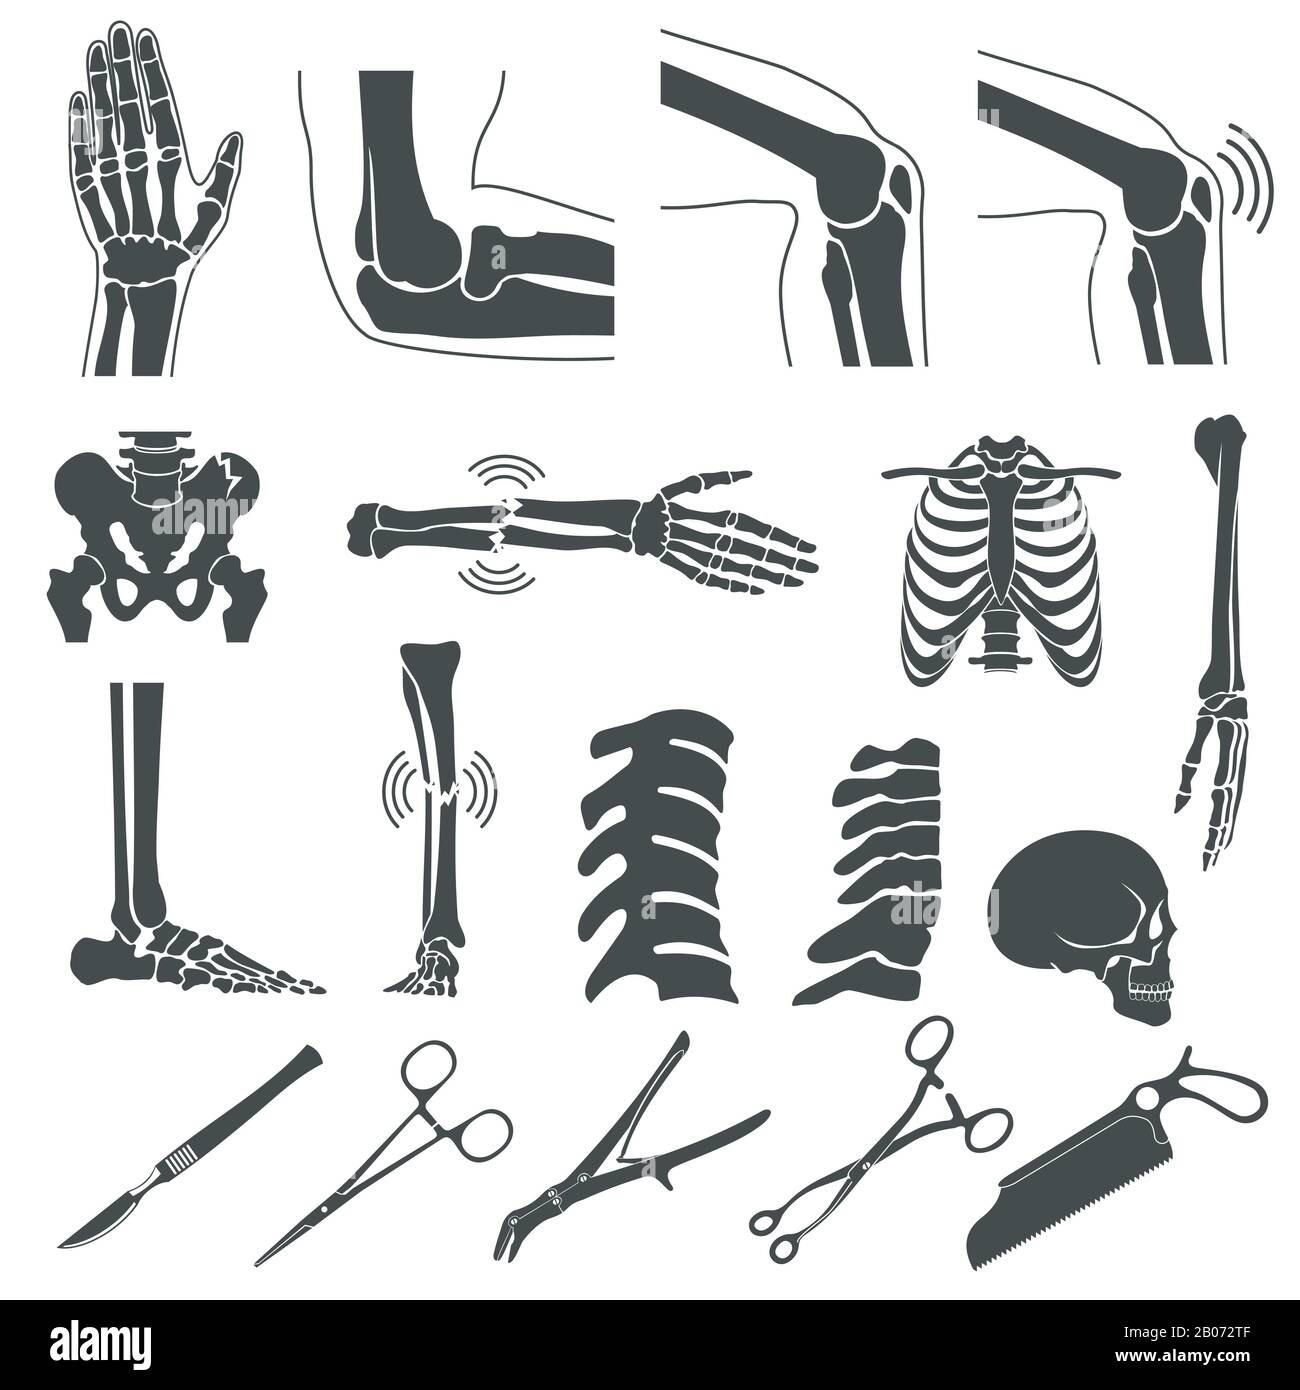 Orthopedic and spine vector black symbols. human bones icons. Hand and leg, skull and joint knee illustration Stock Vector